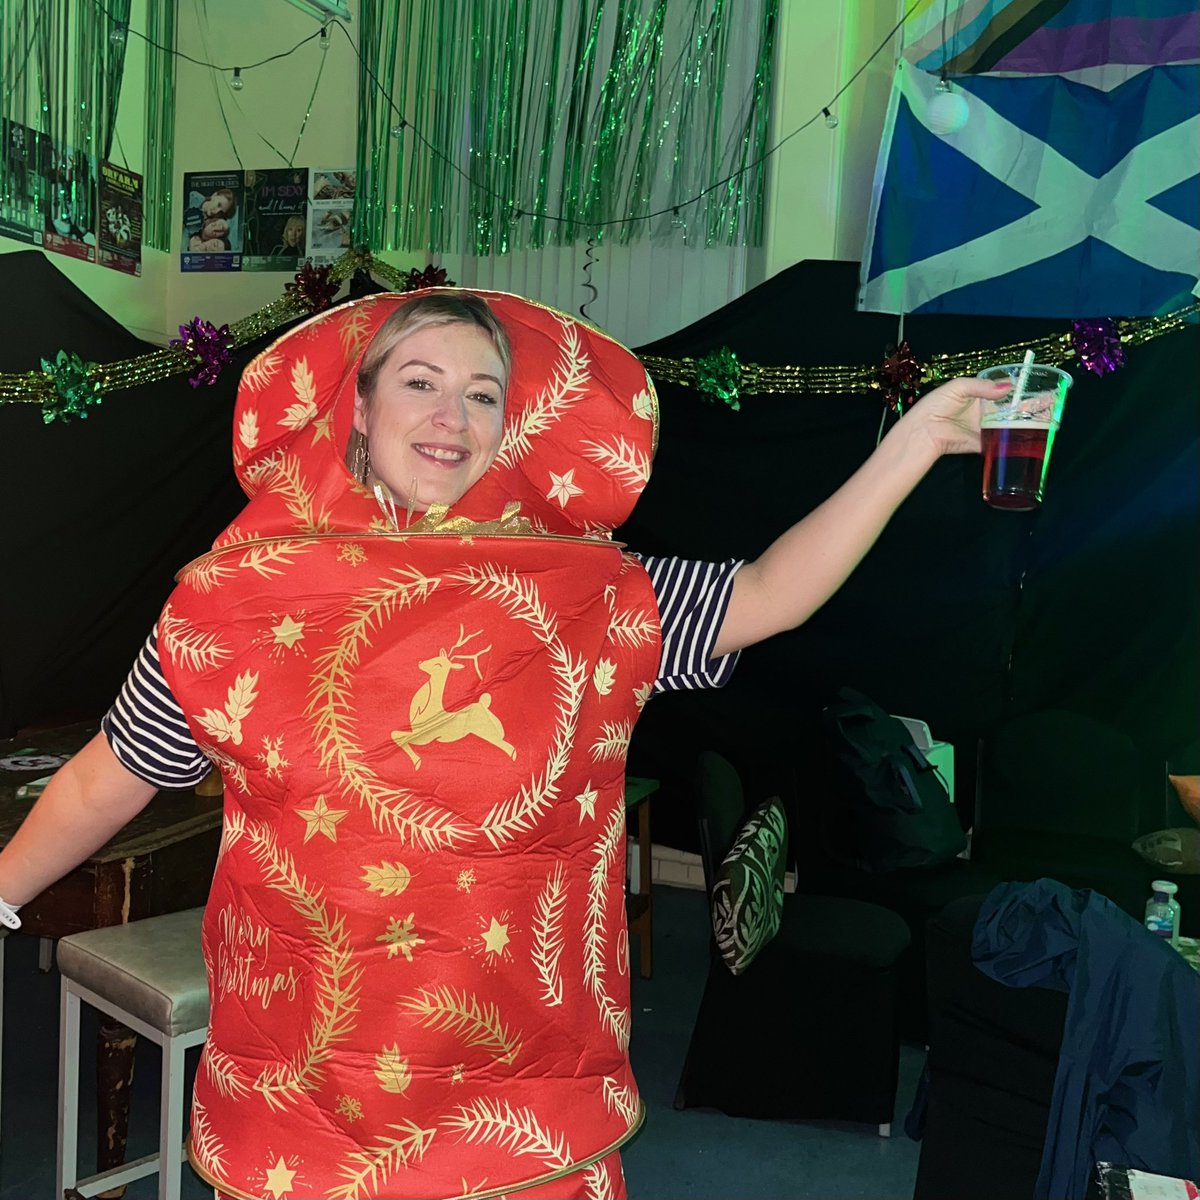 Our Christmas Party last night was SO fun, and quite possibly one of the strangest nights we’ve had in the Infirmary Bar…. which says a lot! 🎄🎁🎅💚 #greensidefamily #edfringe #fillyerboots